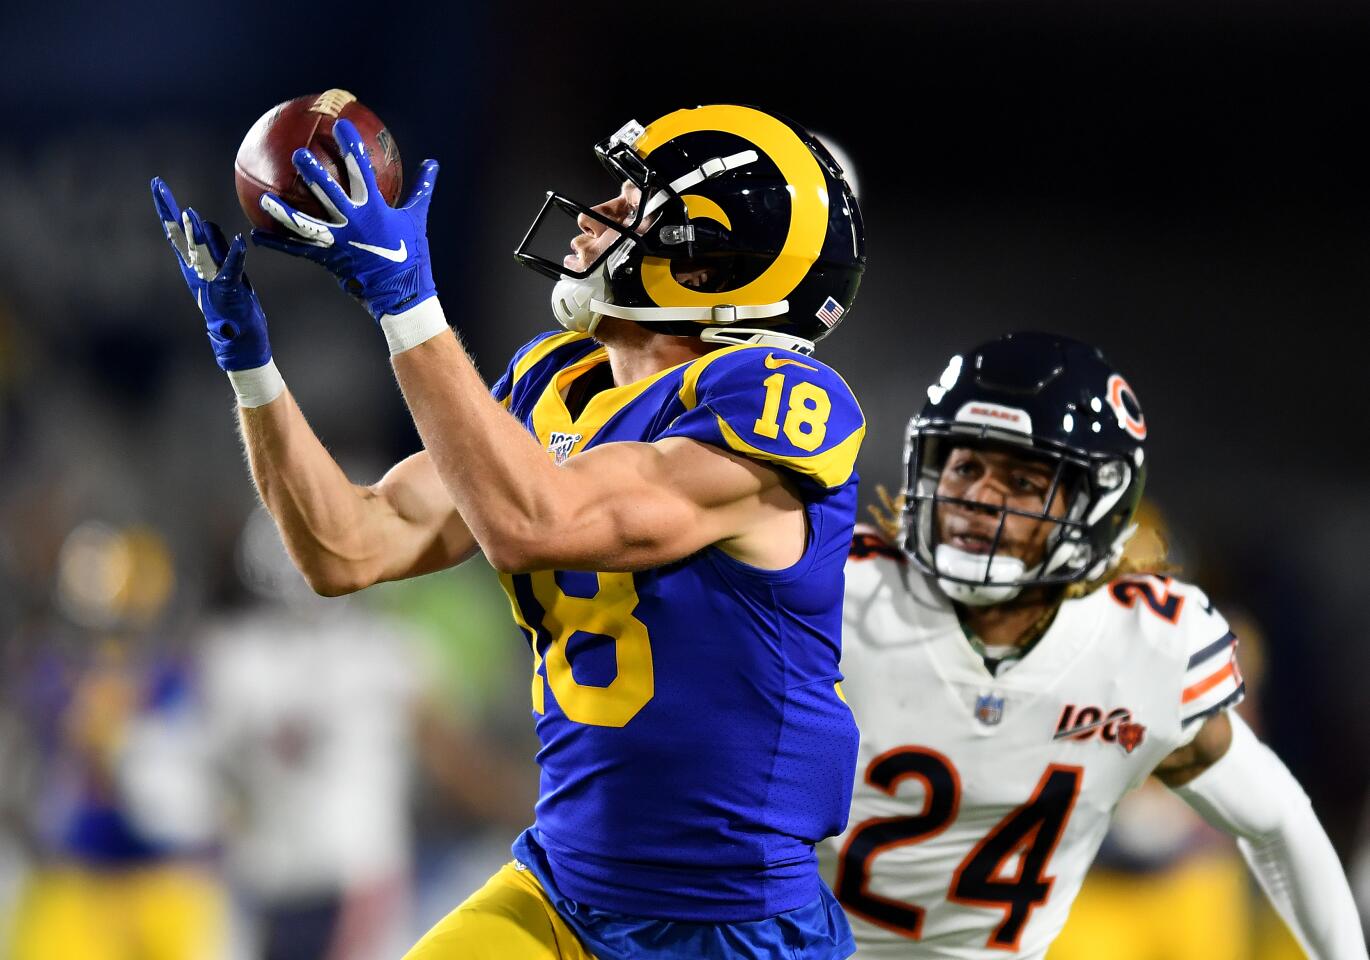 LOS ANGELES, NOVEMBER 17, 2019-Rams receiver Cooper Kupp cacthes a long pass in front of Bears defensive back Buster Skrine setting up a touchdown in the 2nd quarter at the Coliseum Sunday. (Wally Skalij/Los Angerles Times)